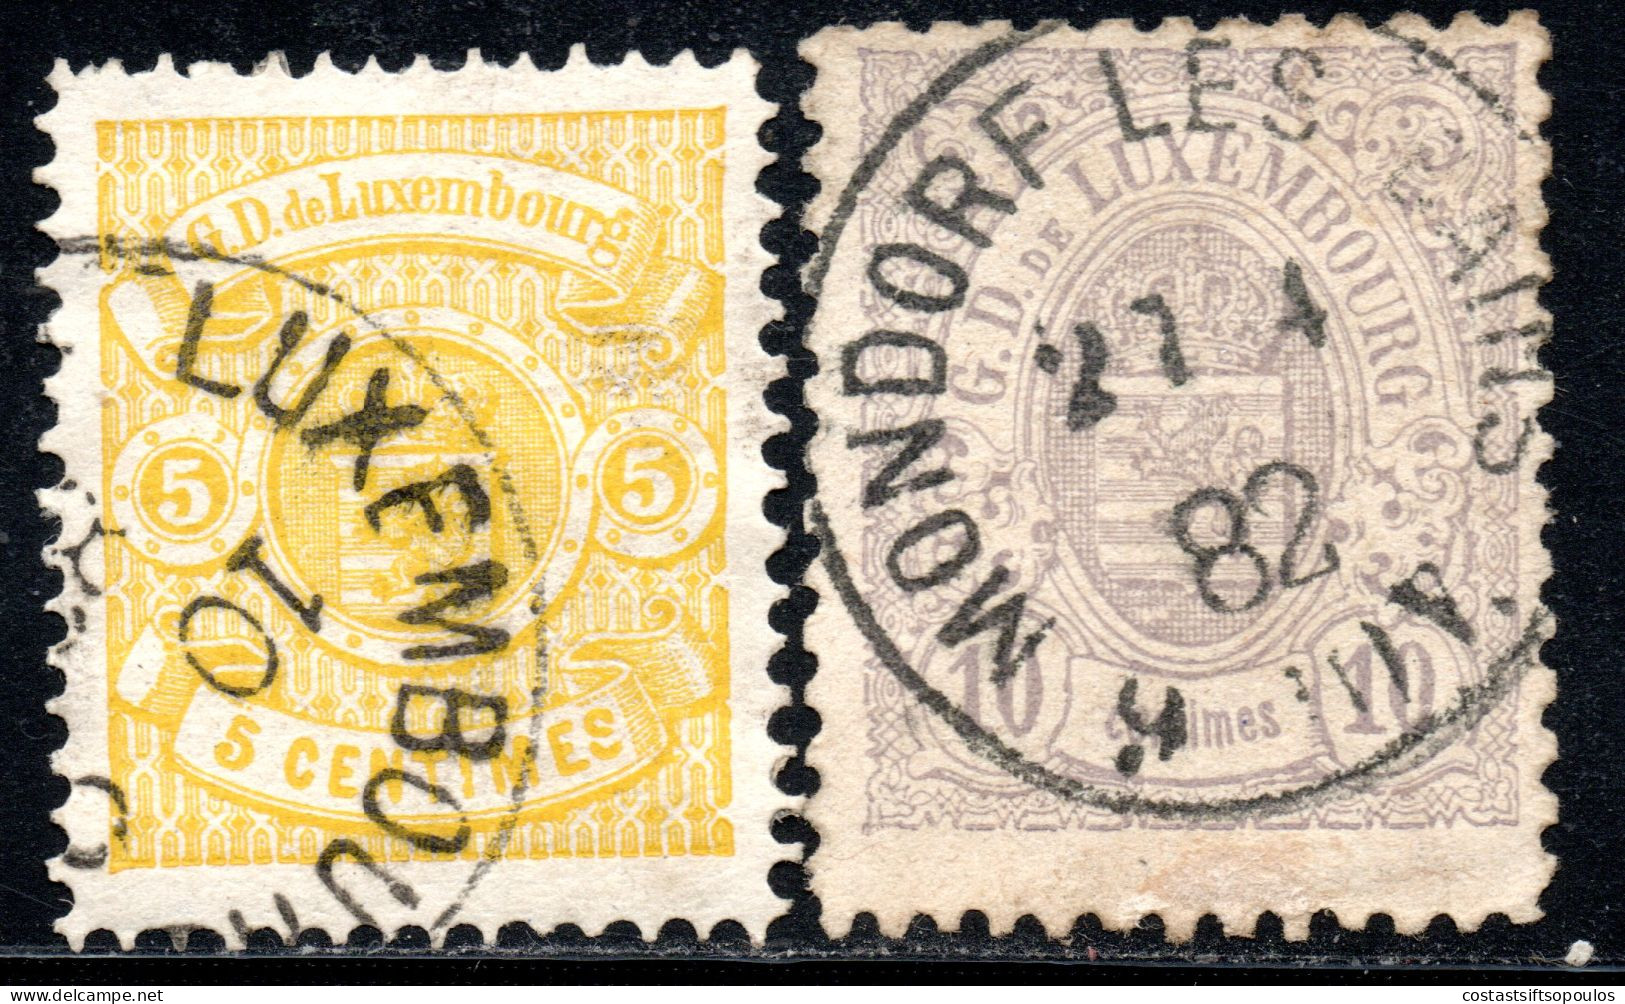 2741.LUXEMBOURG 1880-1881 5 C.,10 C.LOT - 1859-1880 Coat Of Arms